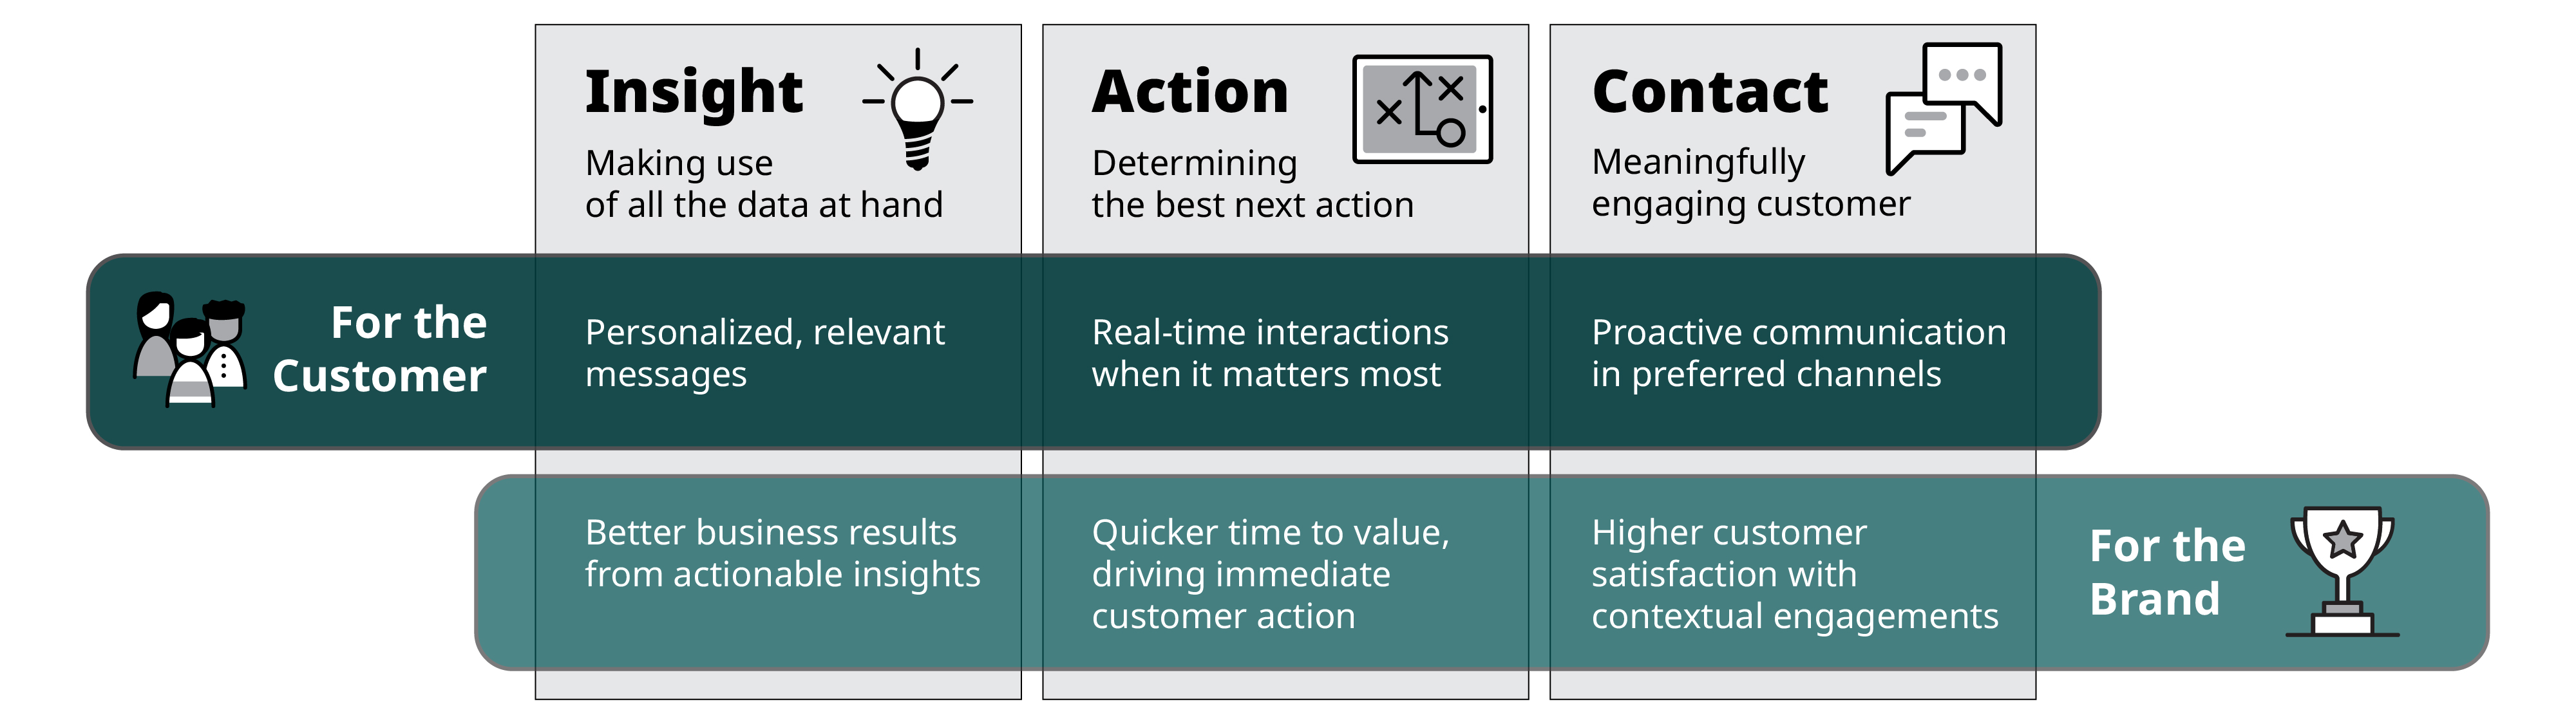 A chart that summarizes the benefits of Insight, Action and Contact in customer interactions, both for the customer and the brand